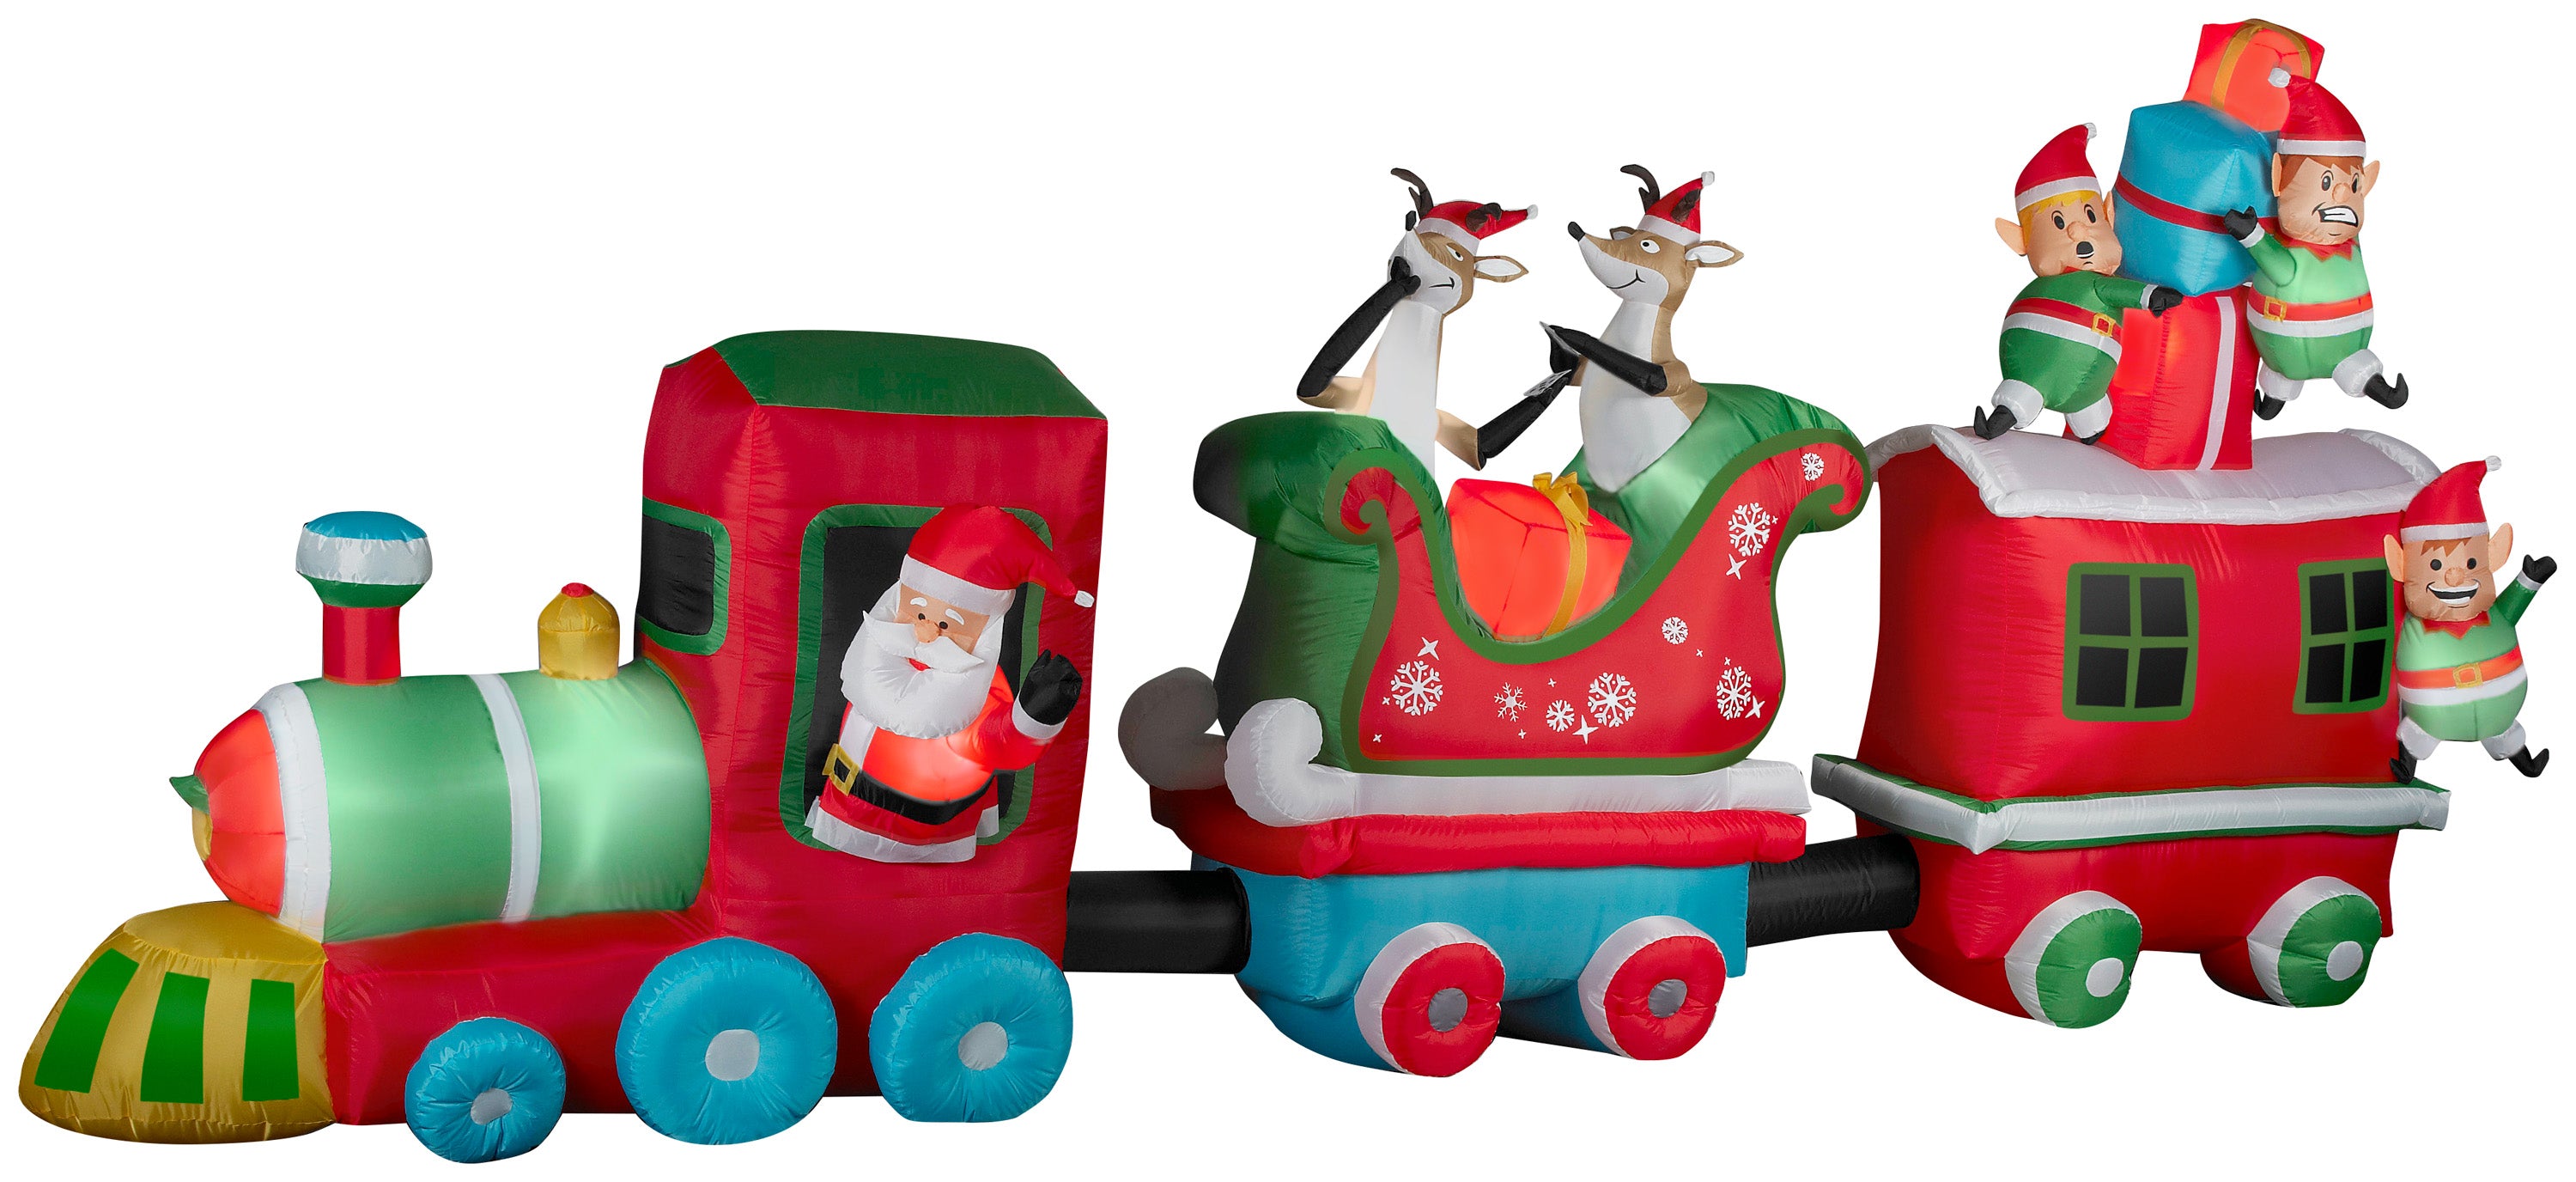 16' Wide Airblown Train Colossal Christmas Inflatable